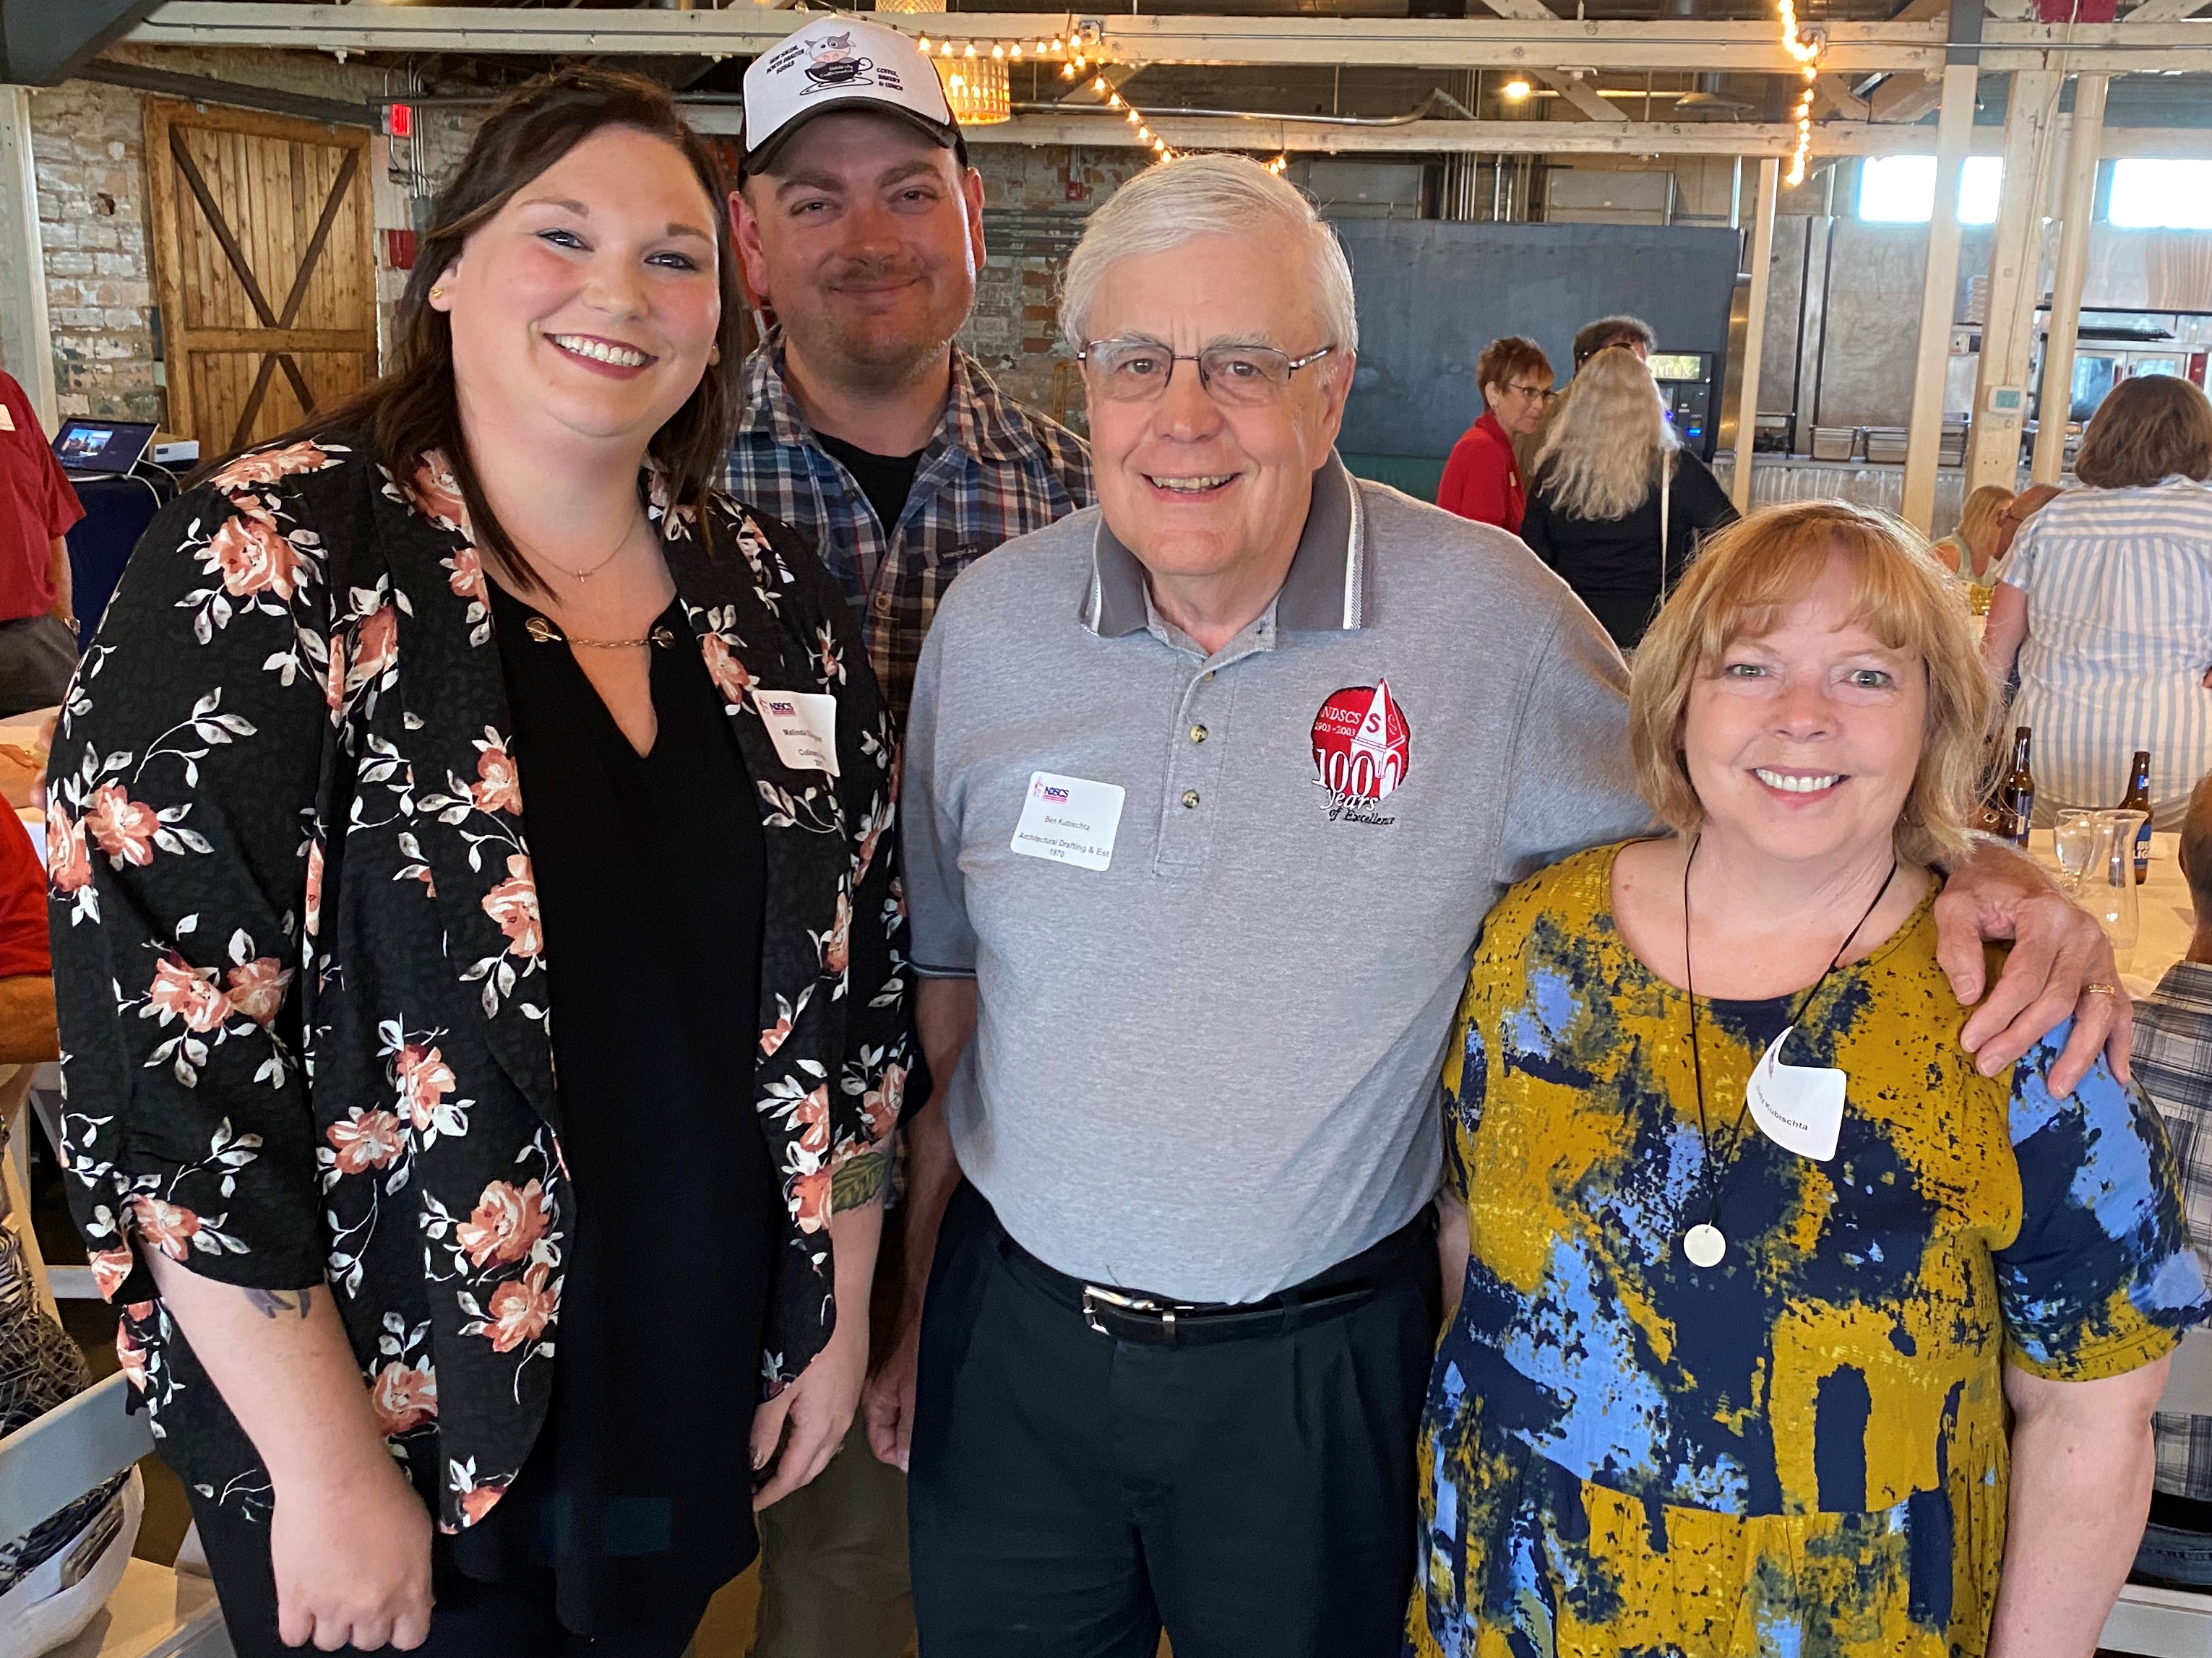 Four alumni together at meet and greet in Bismarck, ND